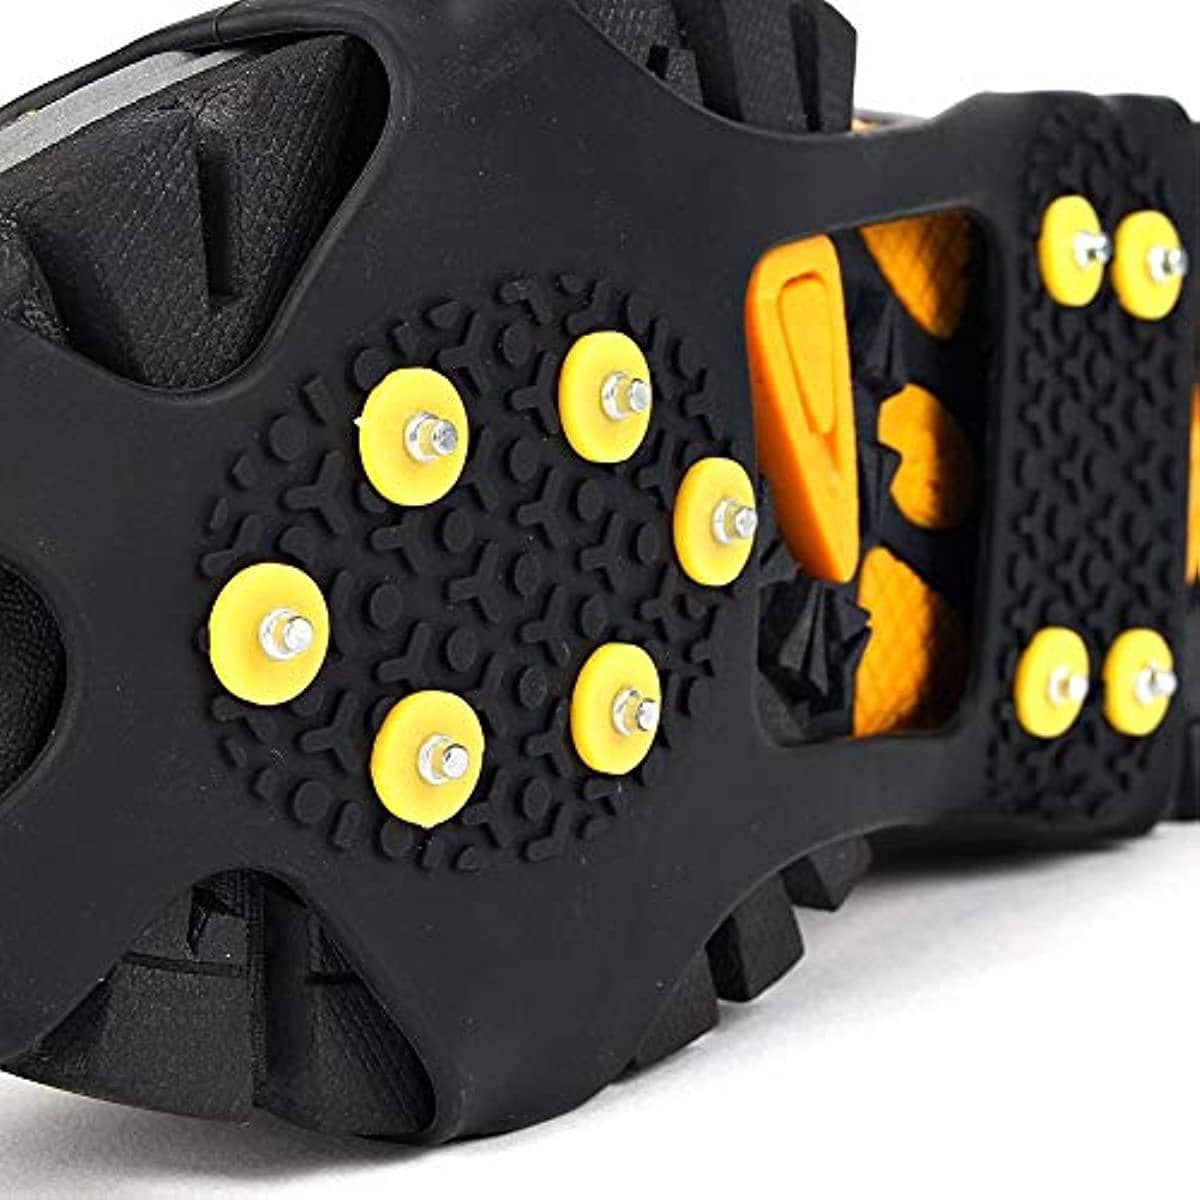 1pair Ice Cleats, Outdoor Traction Cleats, Zinc Alloy 10 Teeth Anti-slip for Boots Shoes for Hiking Climbing